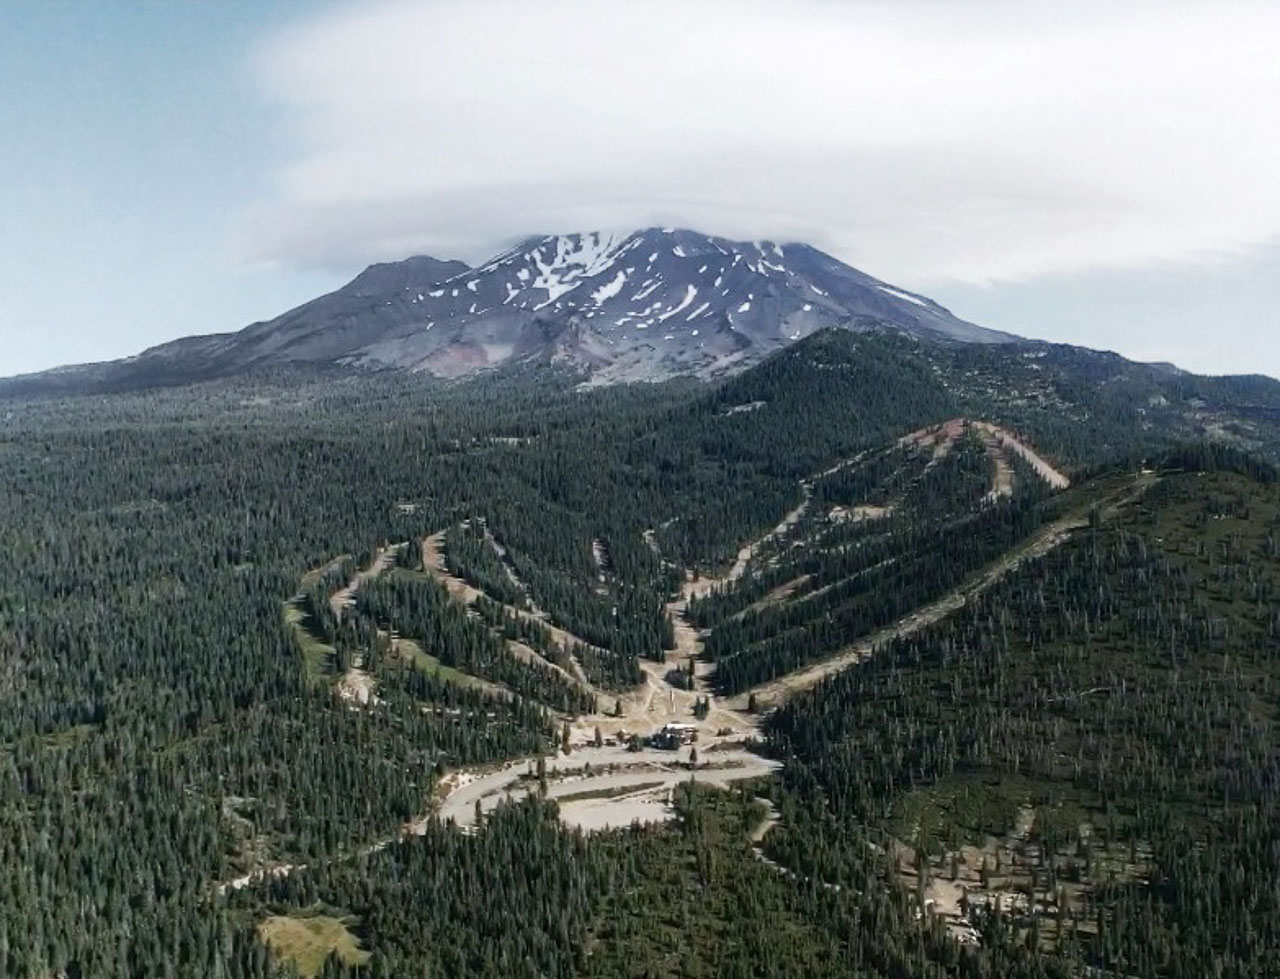 The 2020 Grinduro is moving from Quincy to Mount Shasta.